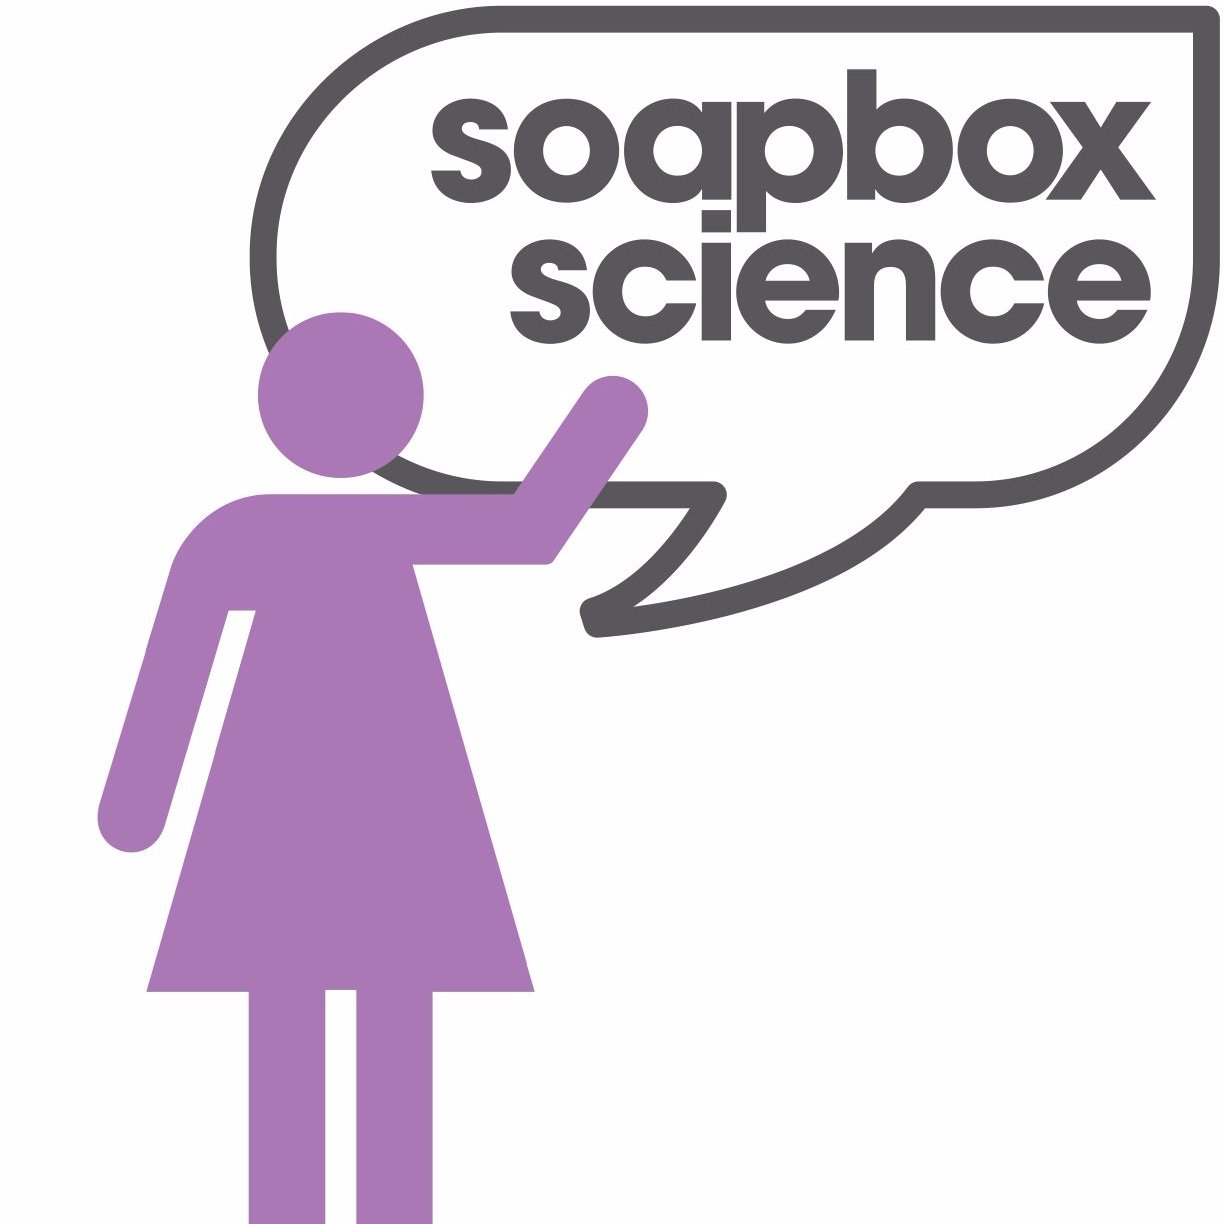 Bringing top female academics to their soapboxes to talk science with the public on the streets. @soapboxscience comes to Dublin and Galway in 2022!